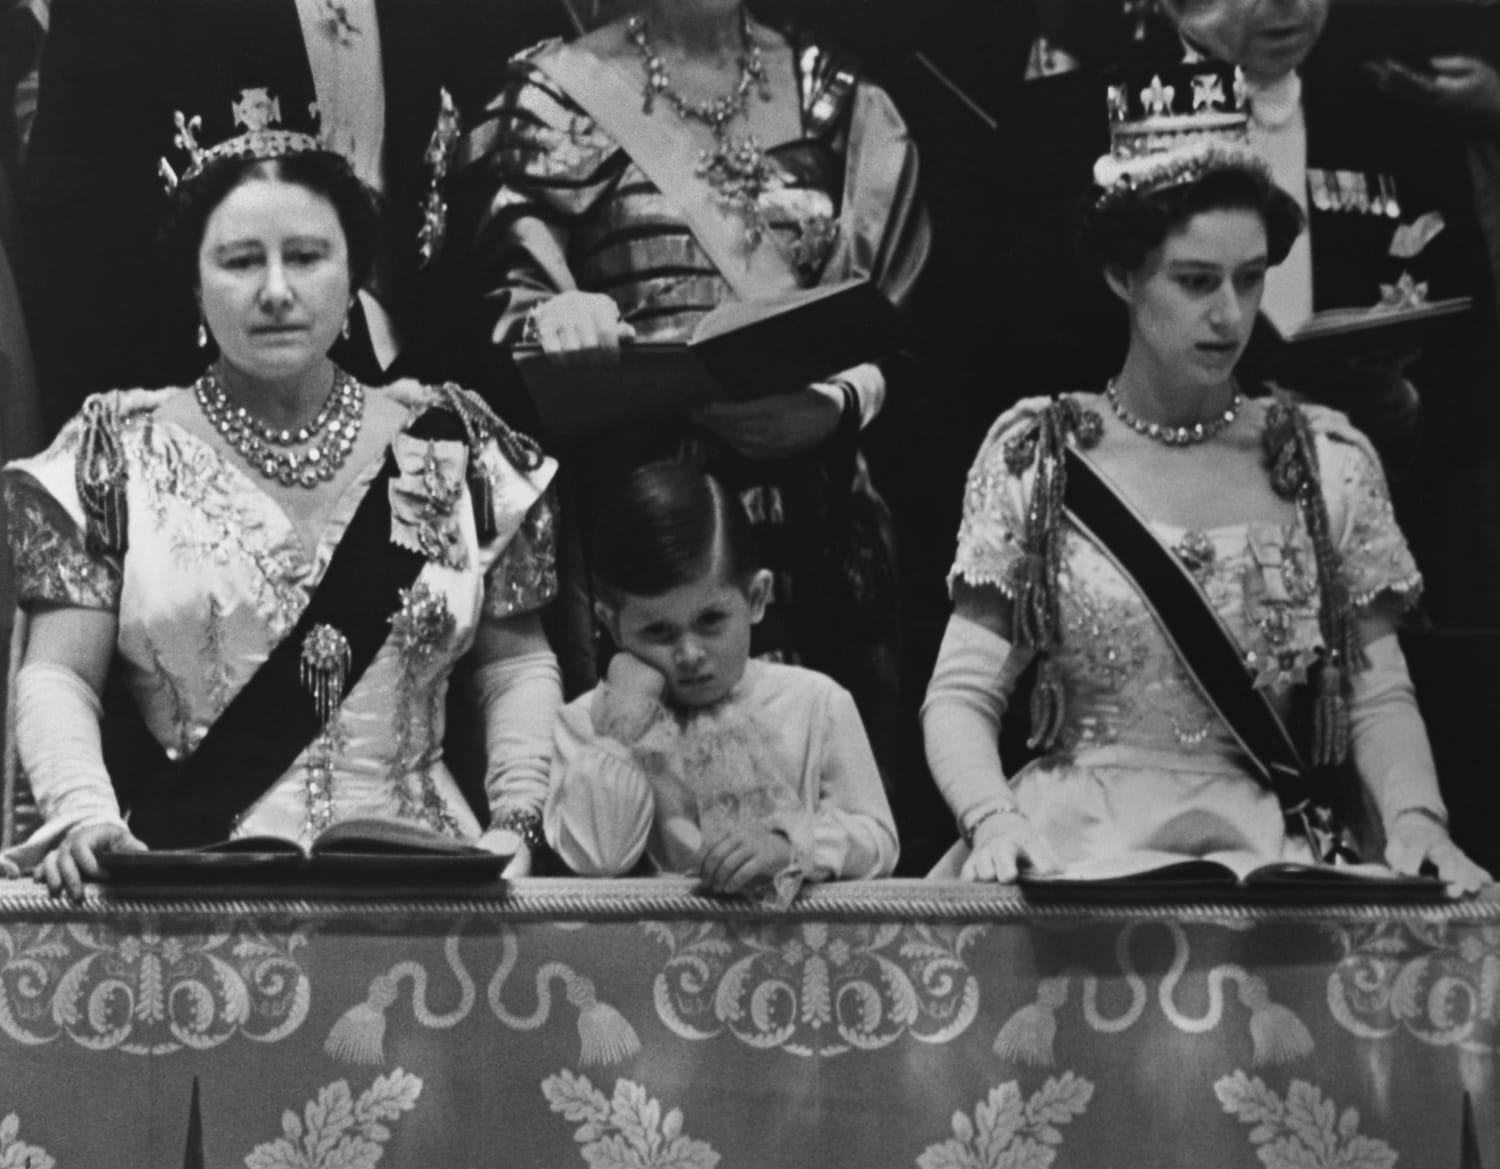 The Queen Mother, Prince Charles, and Princess Margaret in the royal box at Westminster Abbey watching the 1953 Coronation ceremony of Queen Elizabeth II.